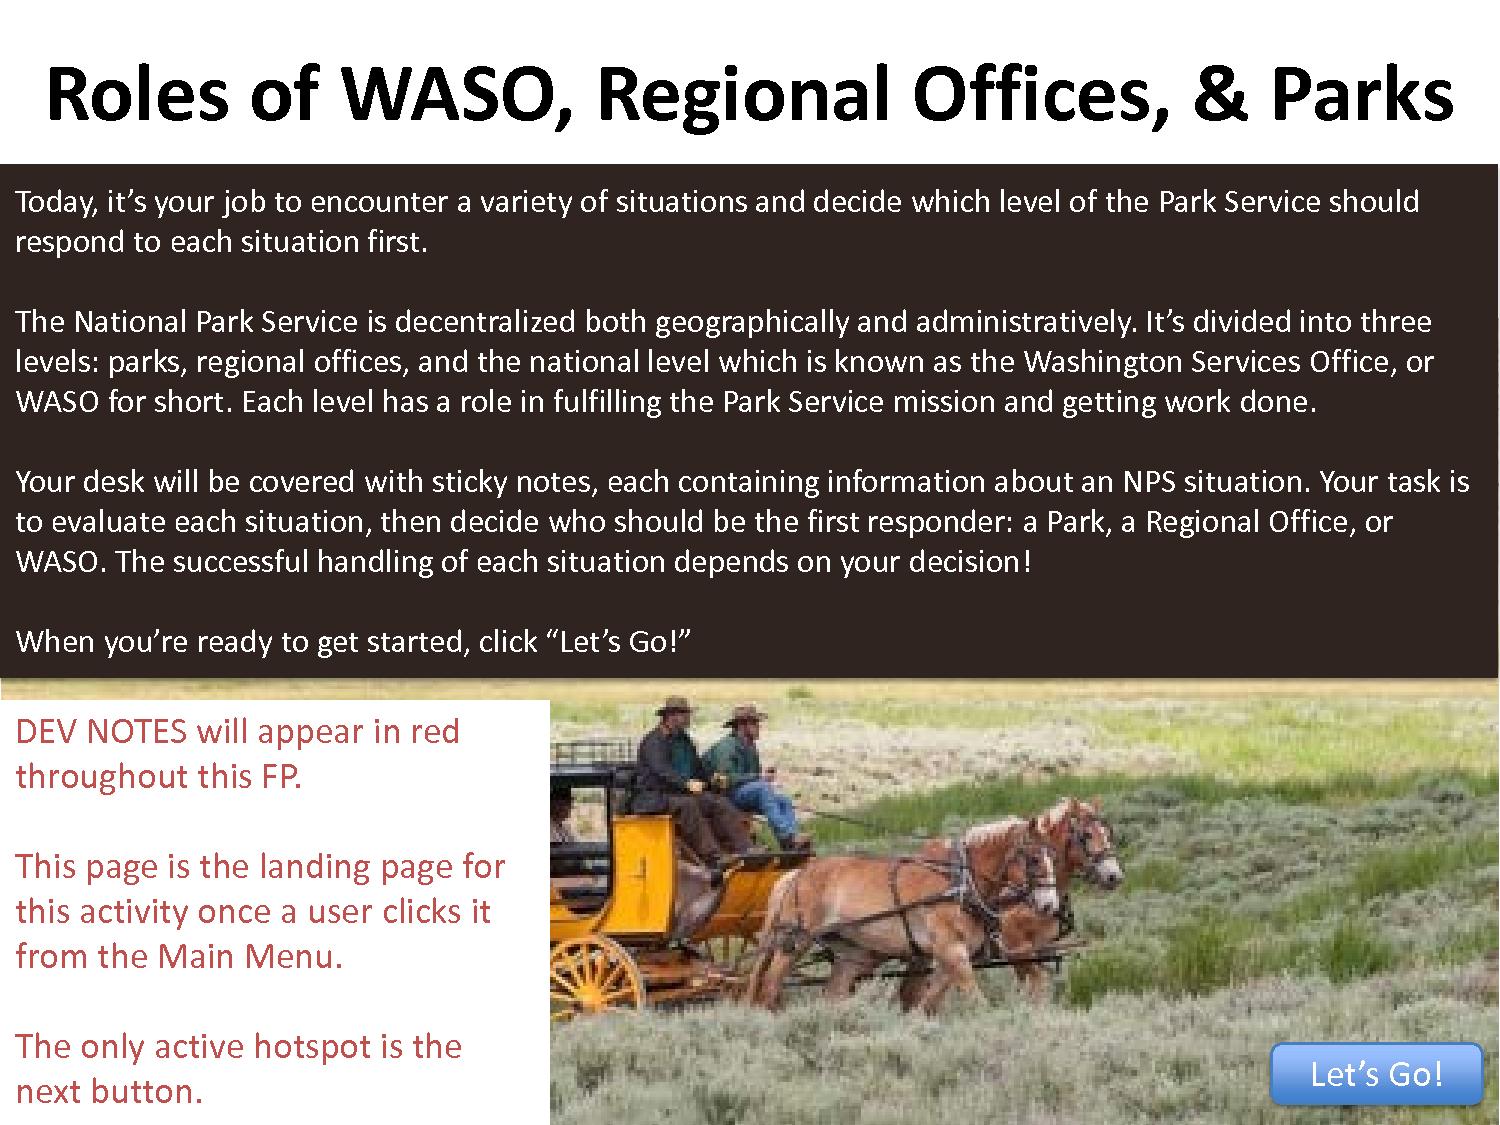 Roles of WASO, Regional Offices, & Parks